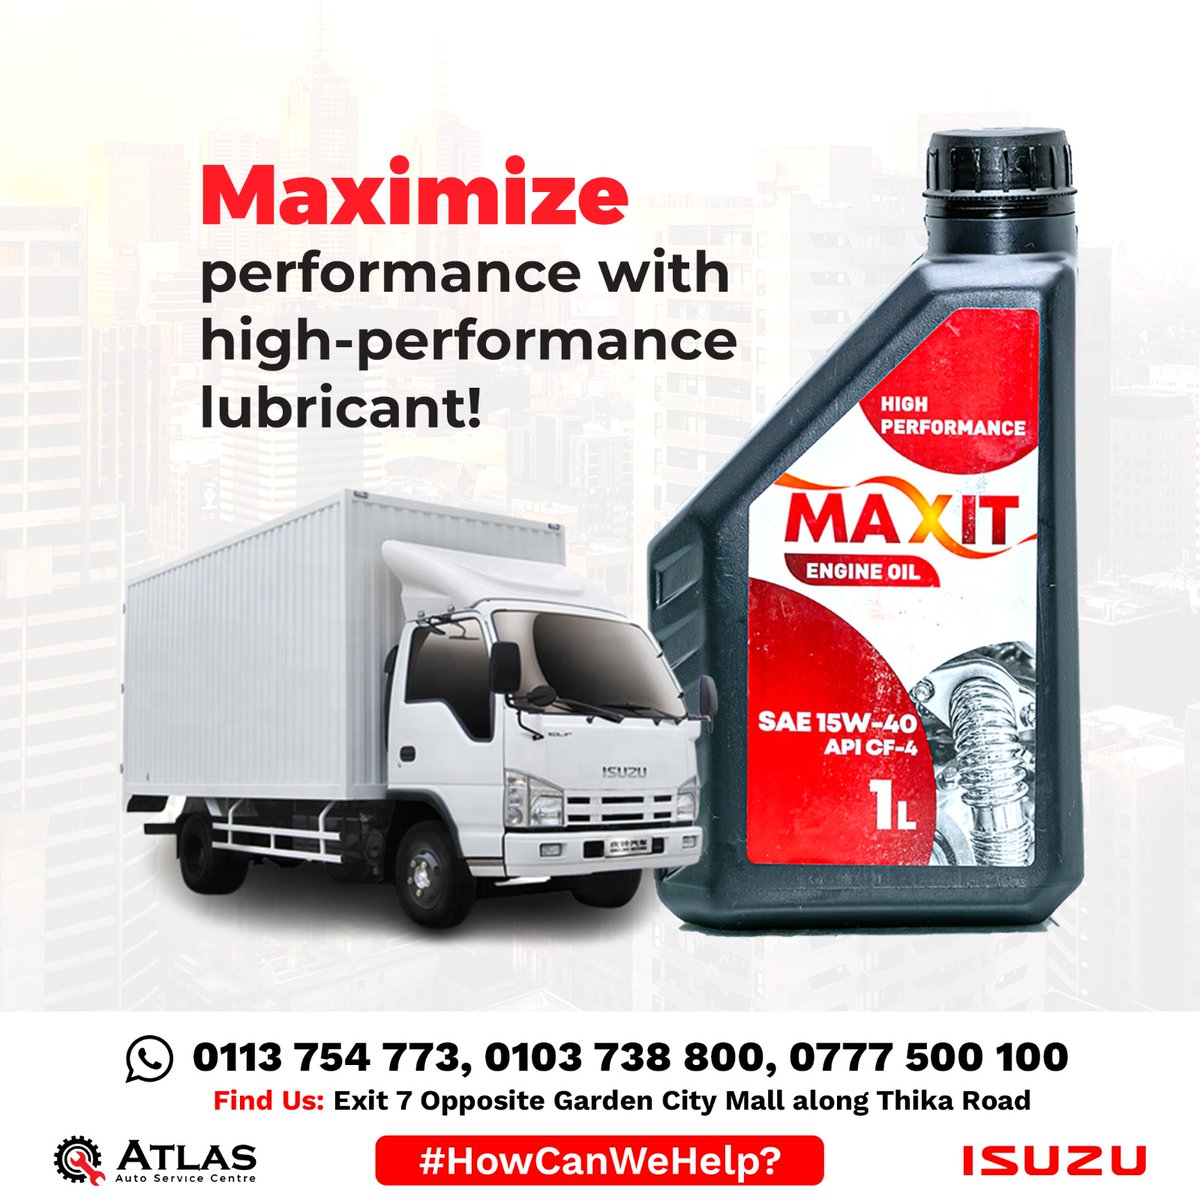 Are you tired of your vehicles oil underperforming? Try Maxit lubricant and see the difference.Visit us @Atlasautocentre  or give us a call today and experience what maxit lubricant can do!!!!#MaximizePerformance #HighPerformanceLubricant #UnleashThePower